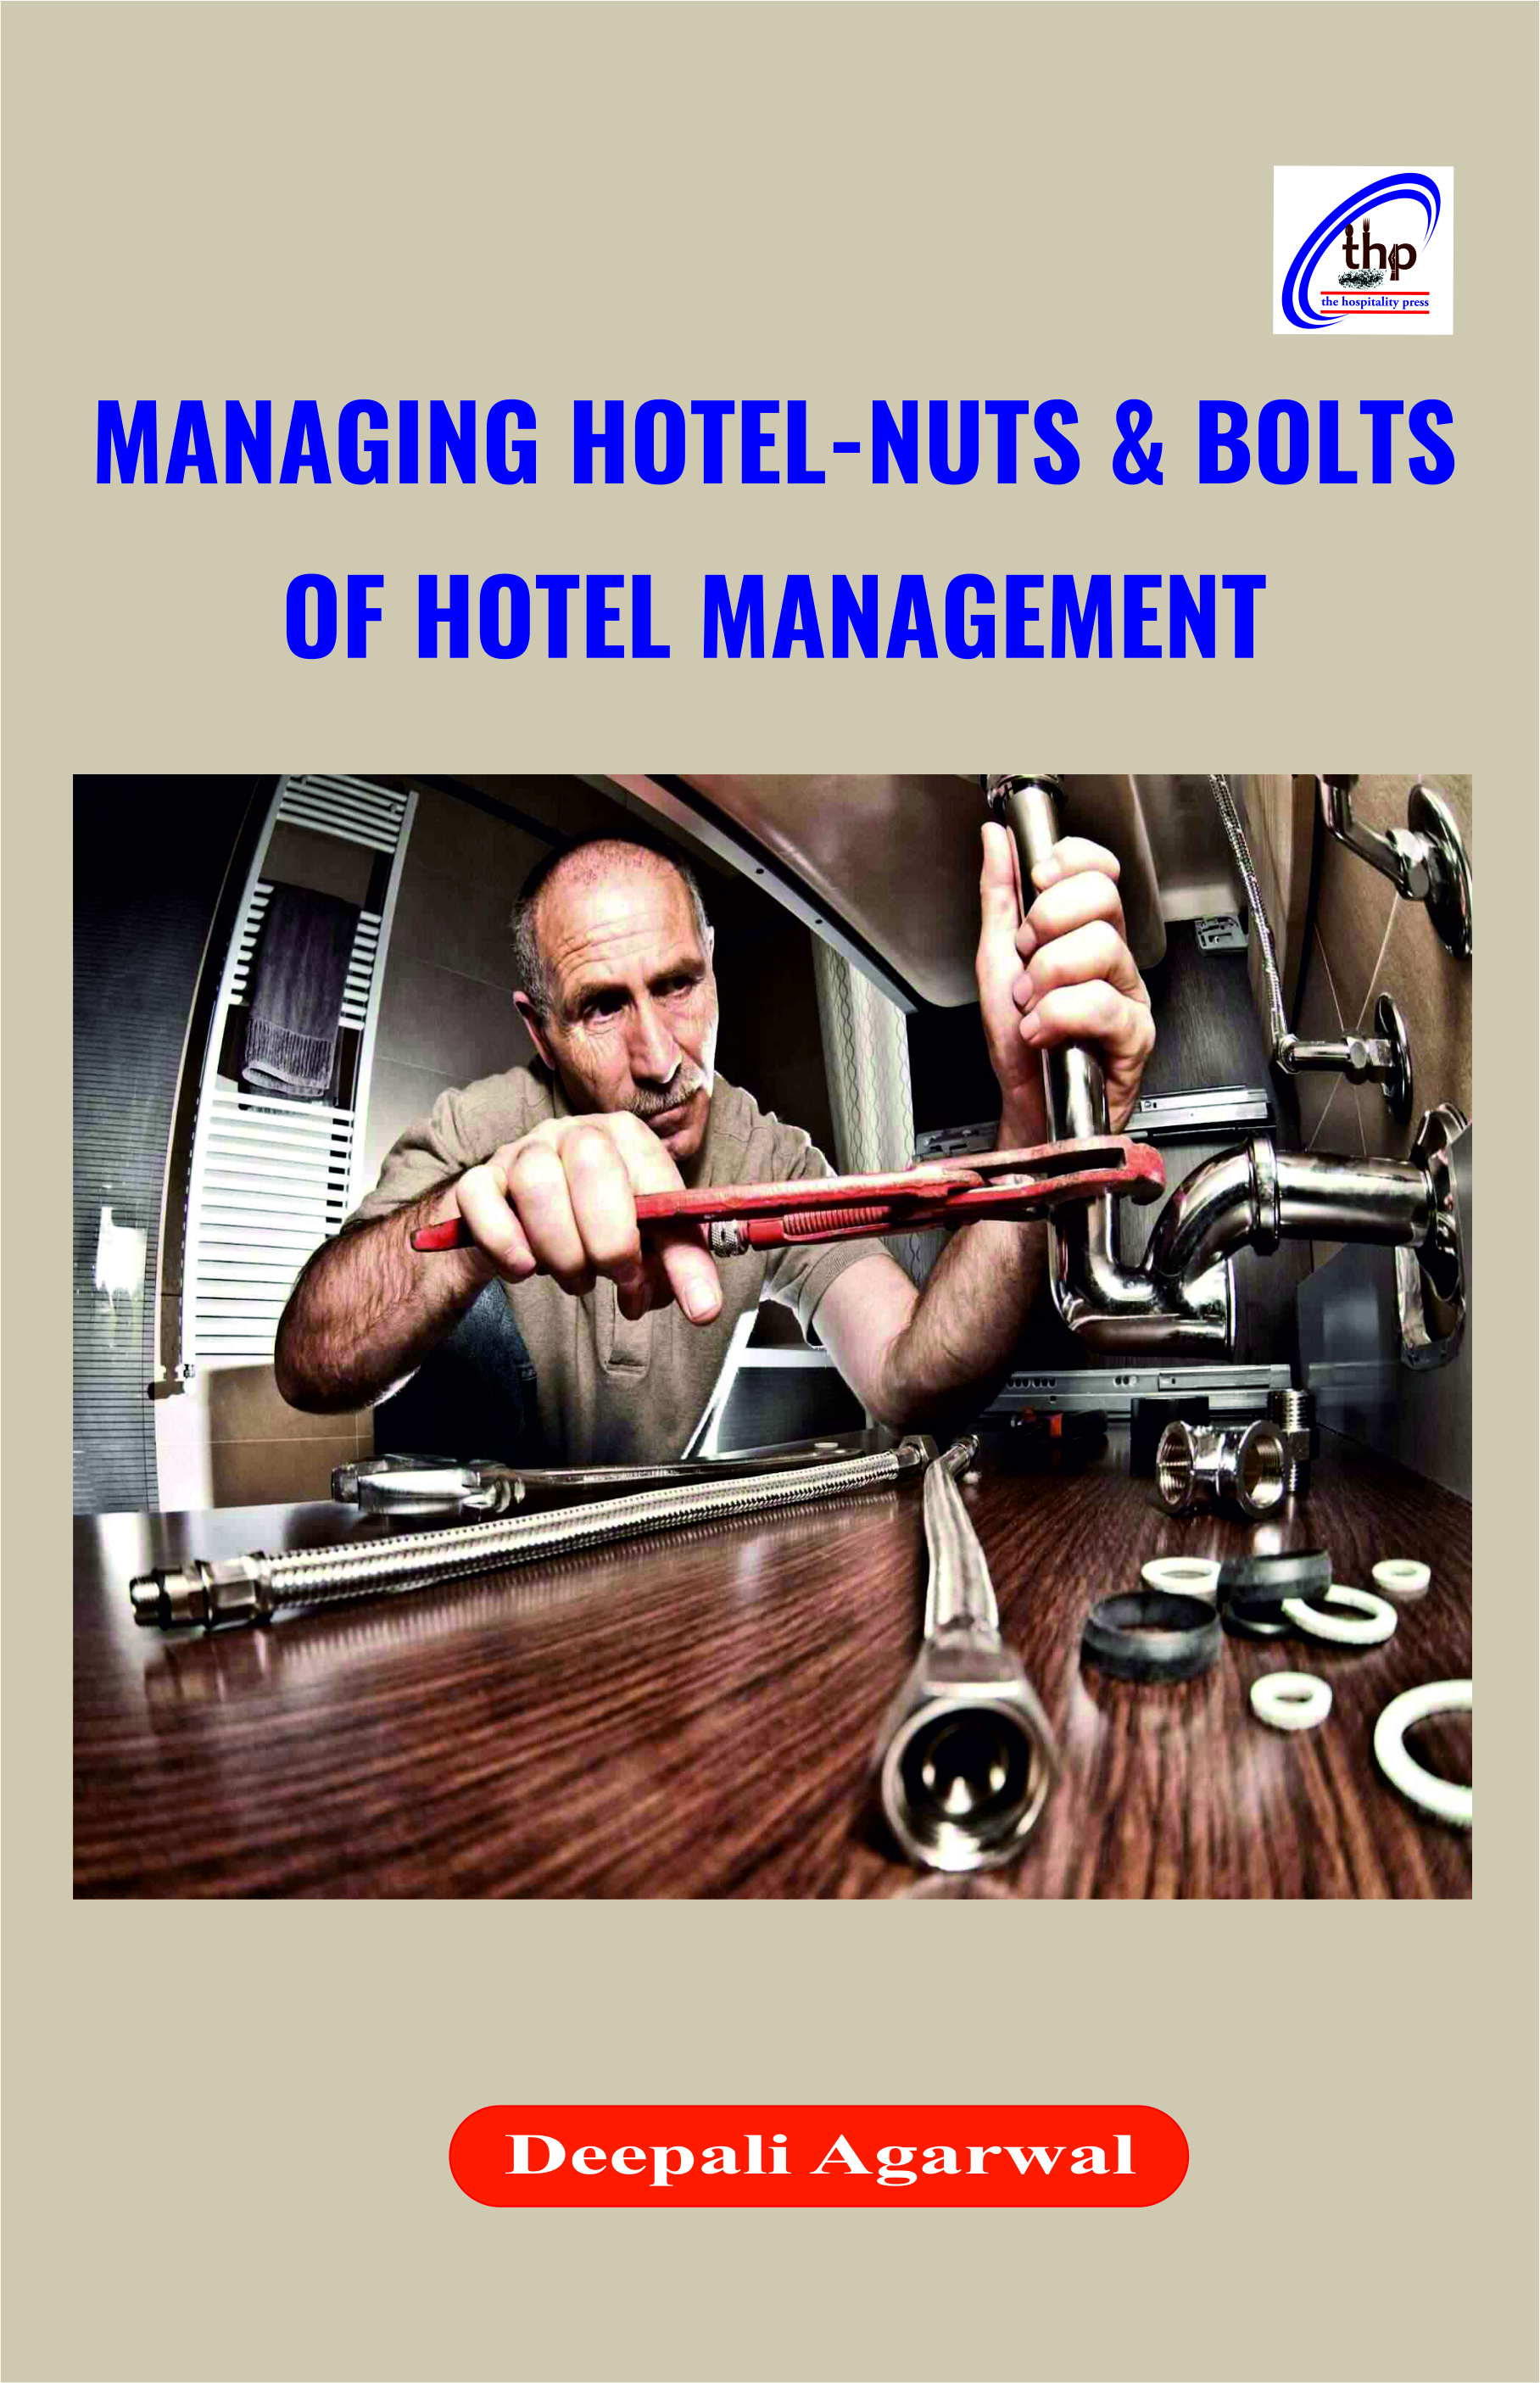 Managing Hotel-Nuts & Bolts of Hotel Management